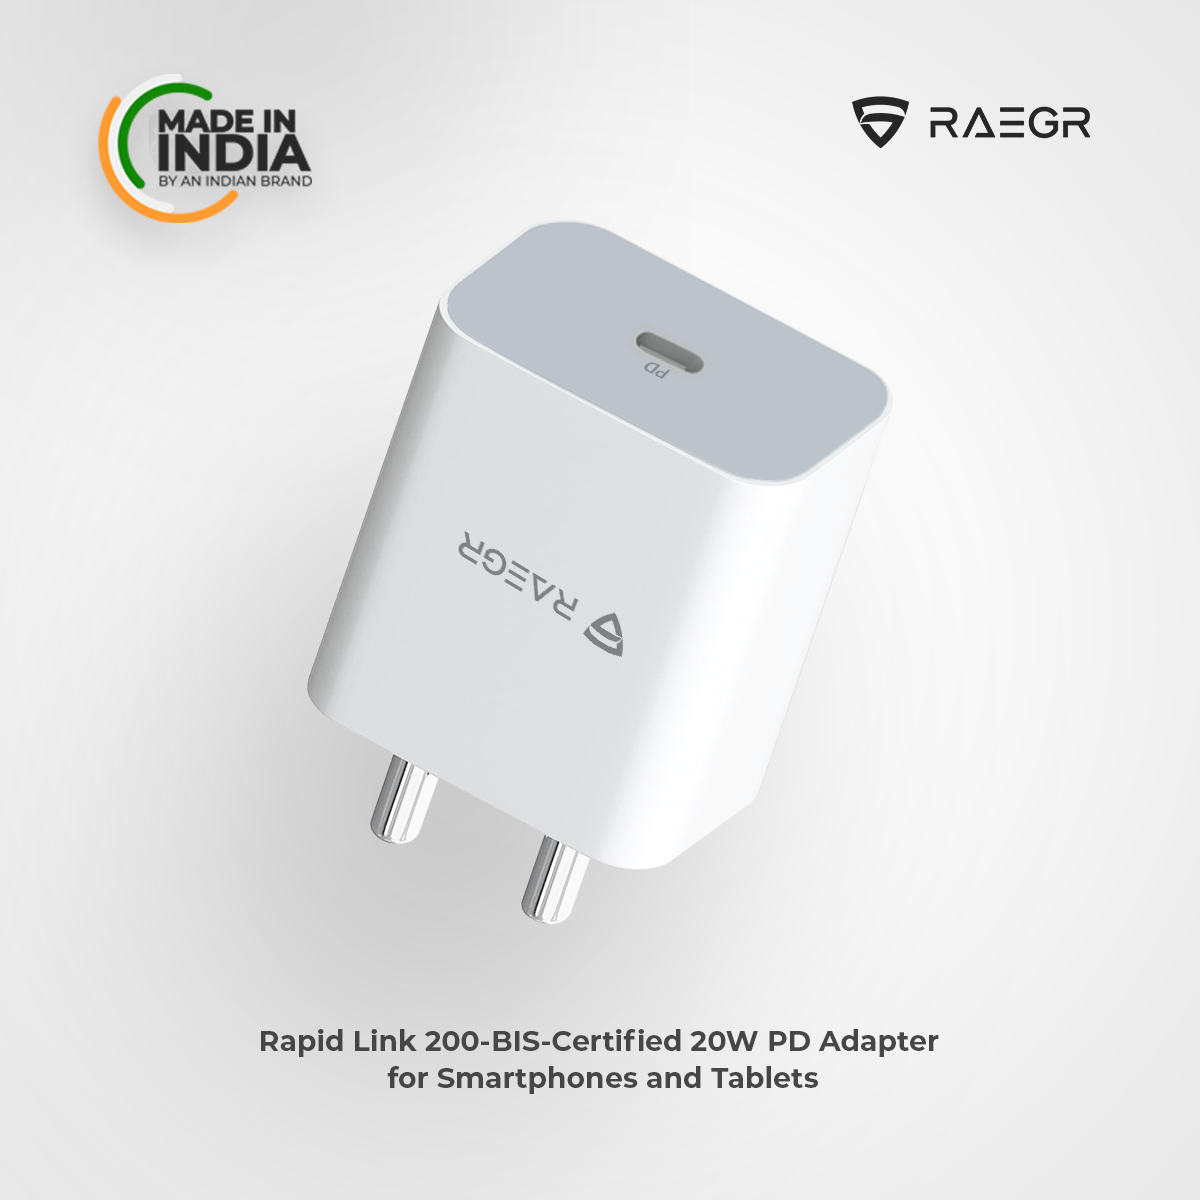 RAEGR launches RapidLink 200 – a Made in India BIS-Certified 20W PD Adapter for Smartphones and Tablets